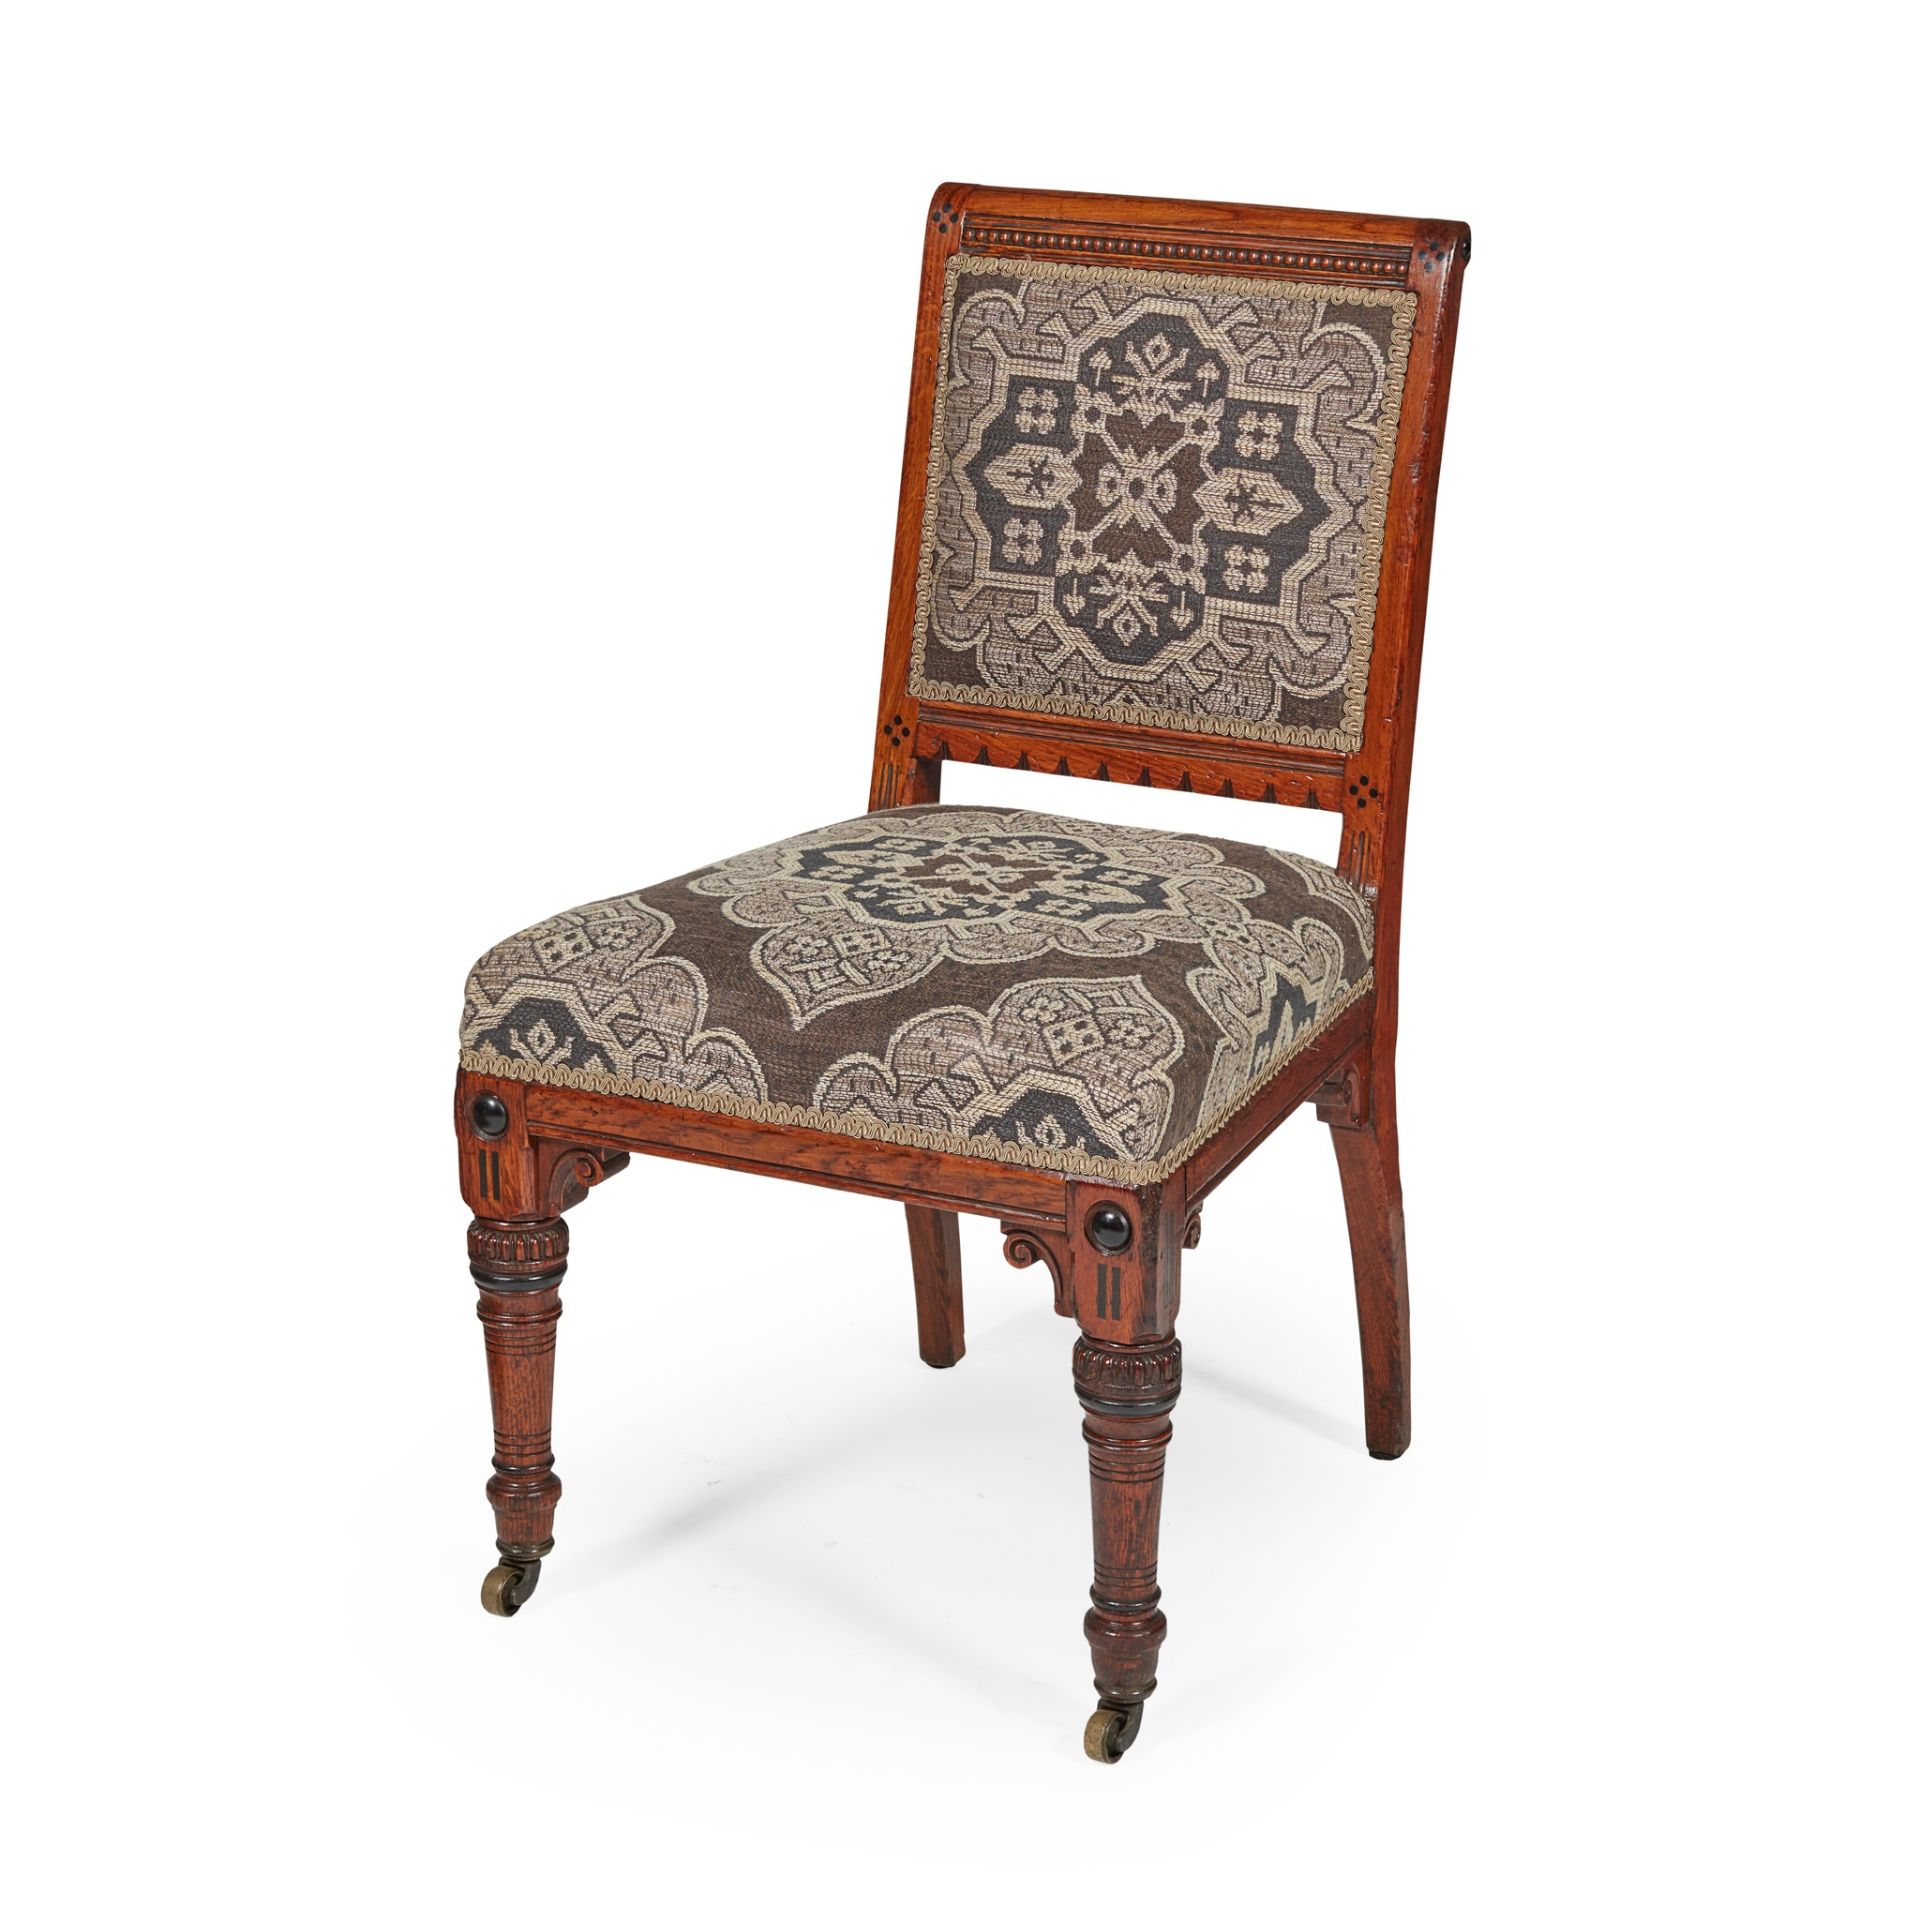 JAMES LAMB, MANCHESTER SET OF TWELVE AESTHETIC MOVEMENT DINING CHAIRS, CIRCA 1890 - Image 2 of 7